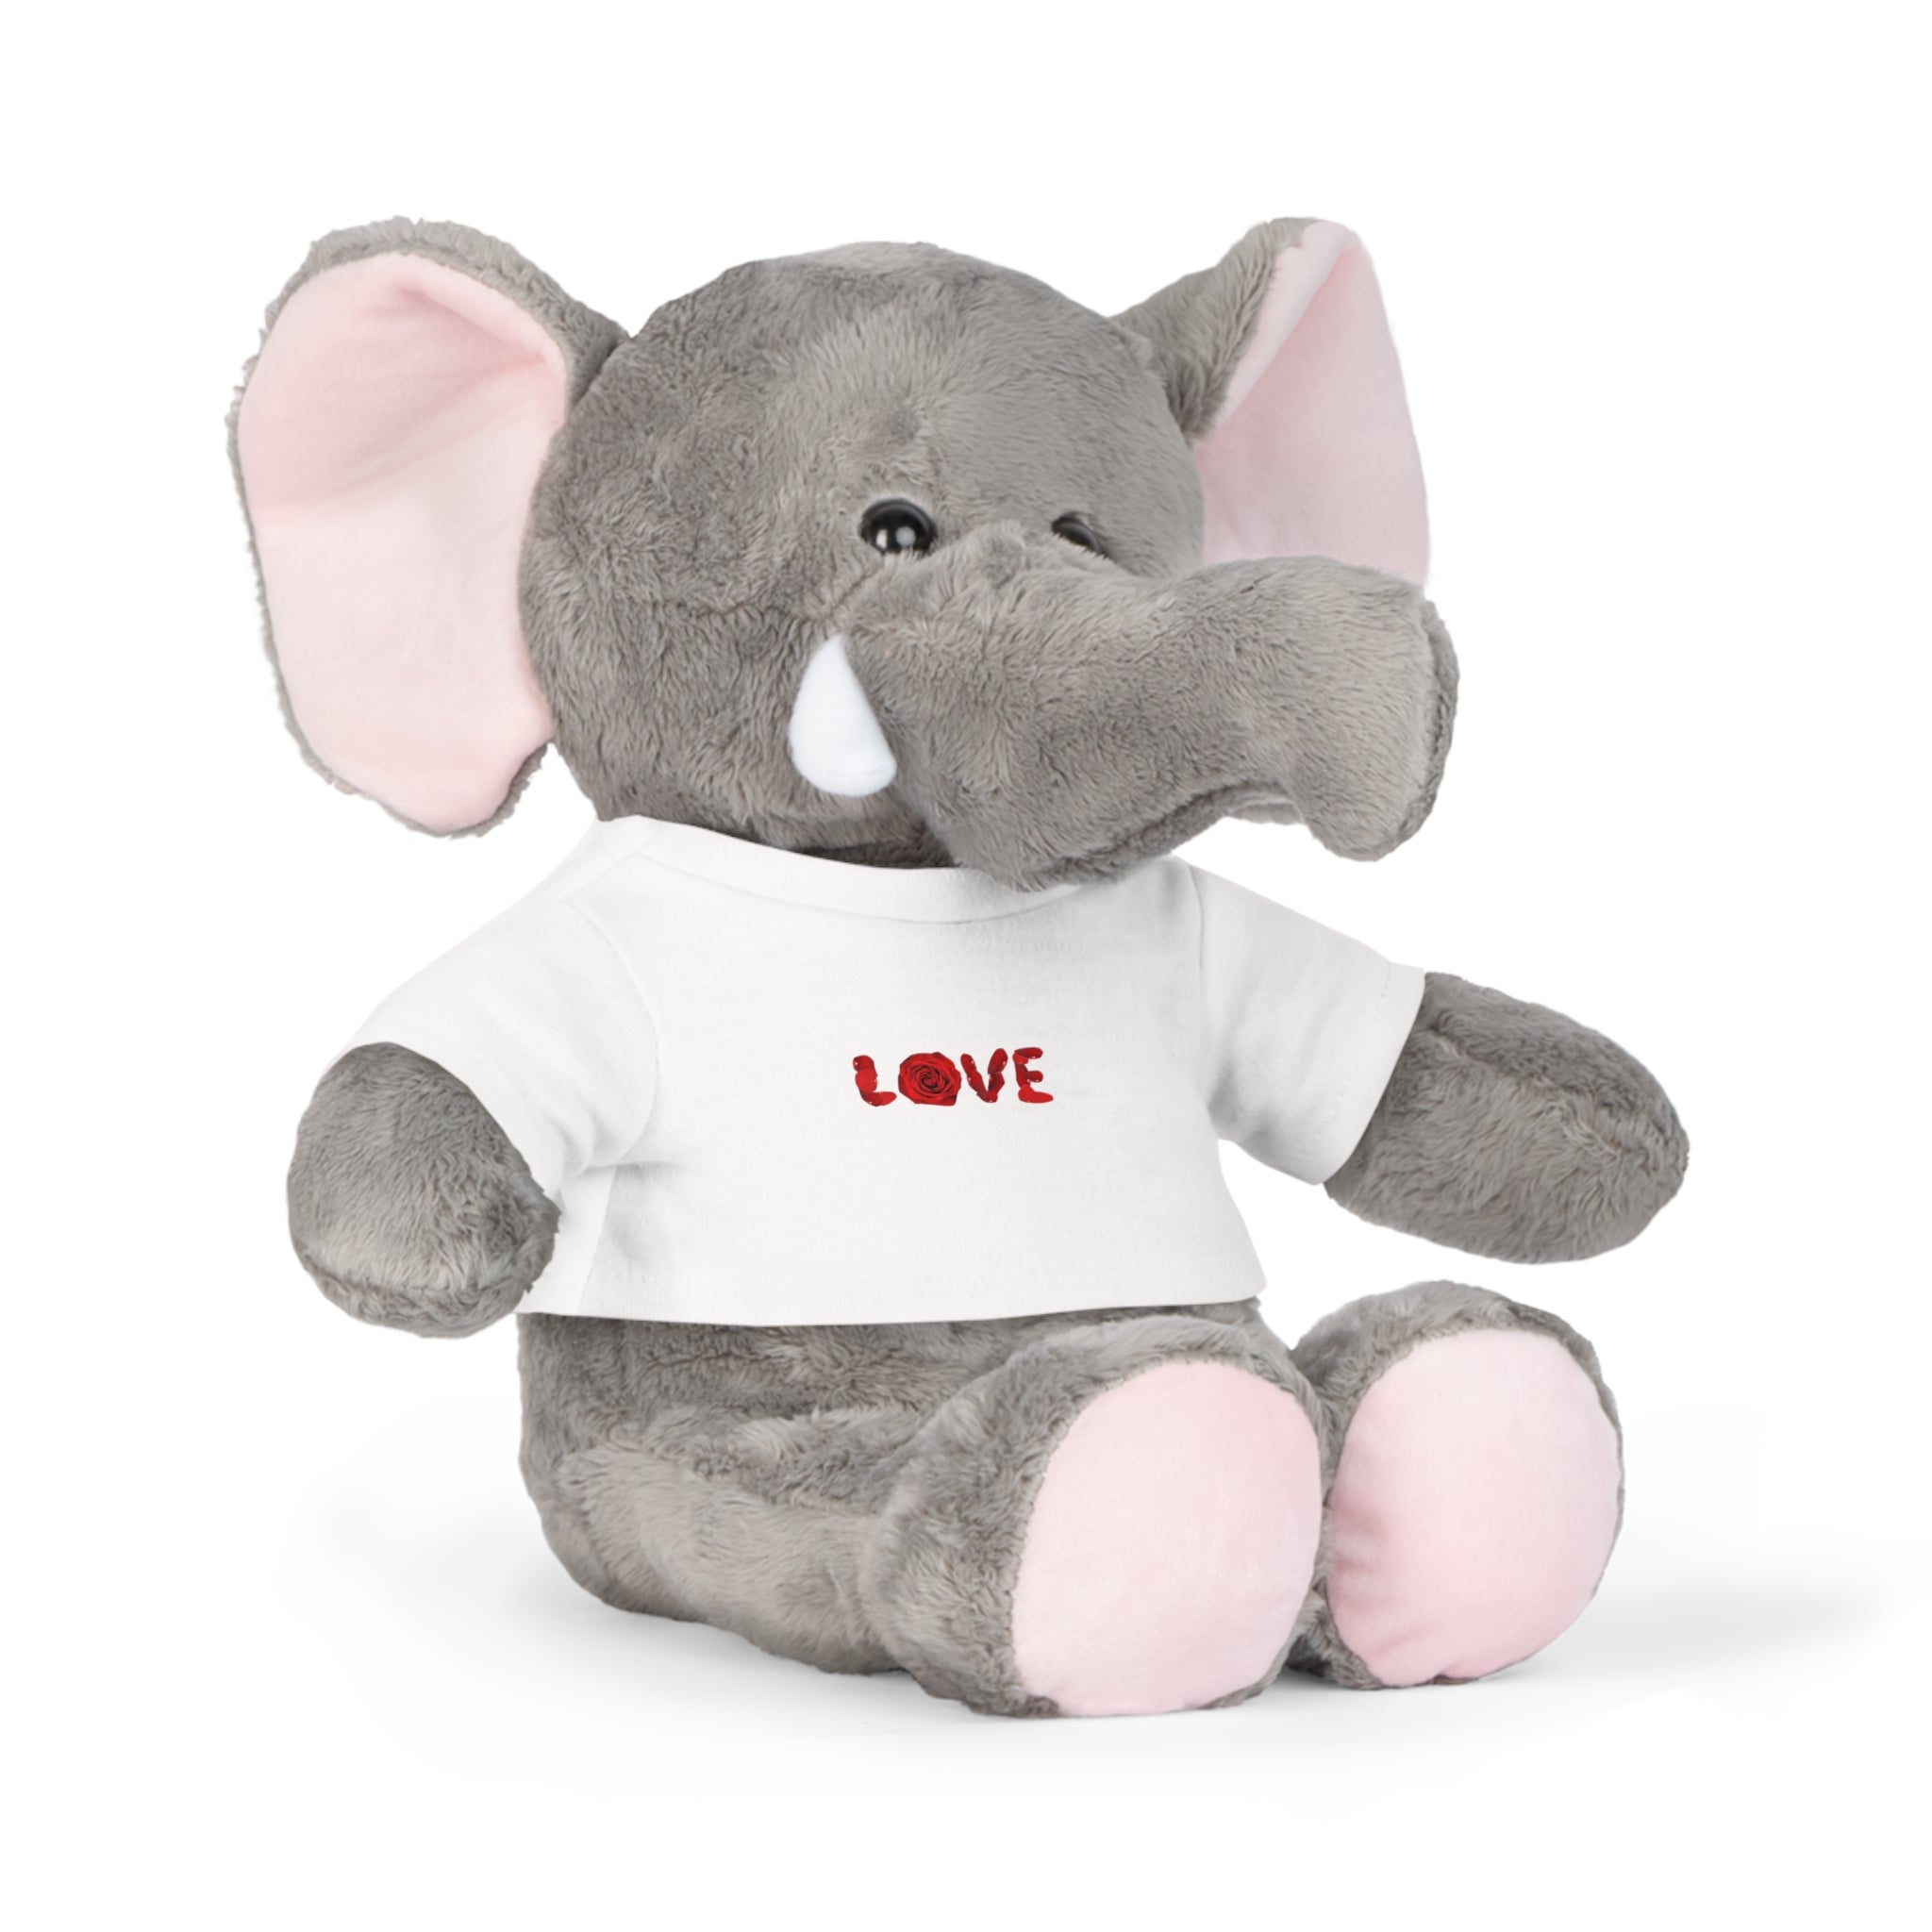 Love Plush Toy with T-Shirt